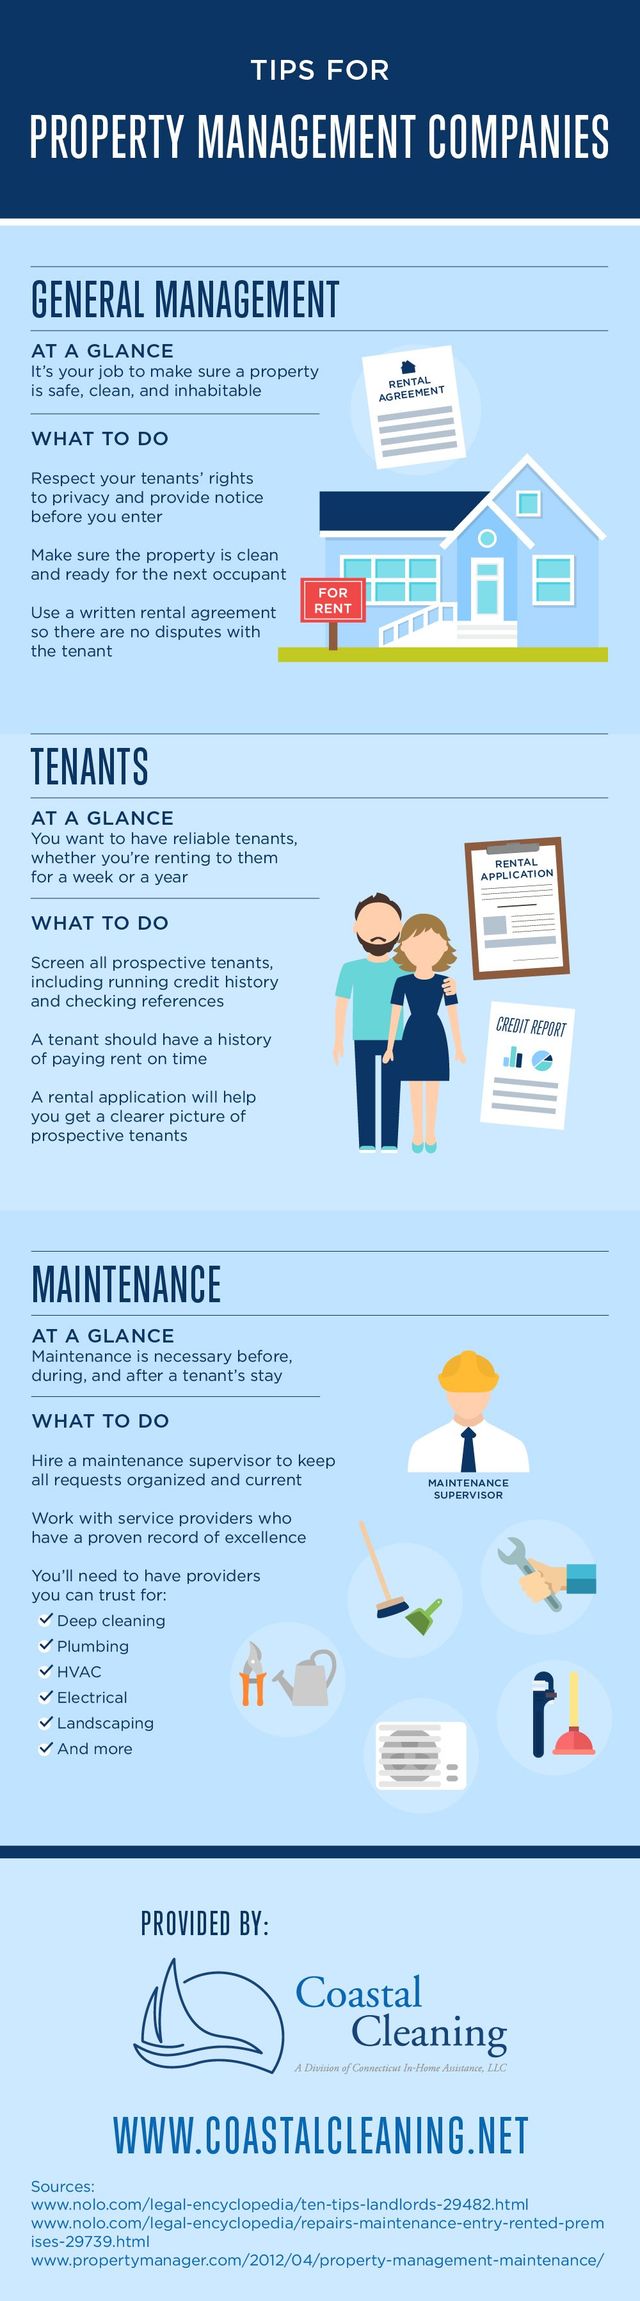 https://lirp.cdn-website.com/70ed83f7/dms3rep/multi/opt/Tips-for-Property-Management-Companies-Infographic-01-640w.jpeg